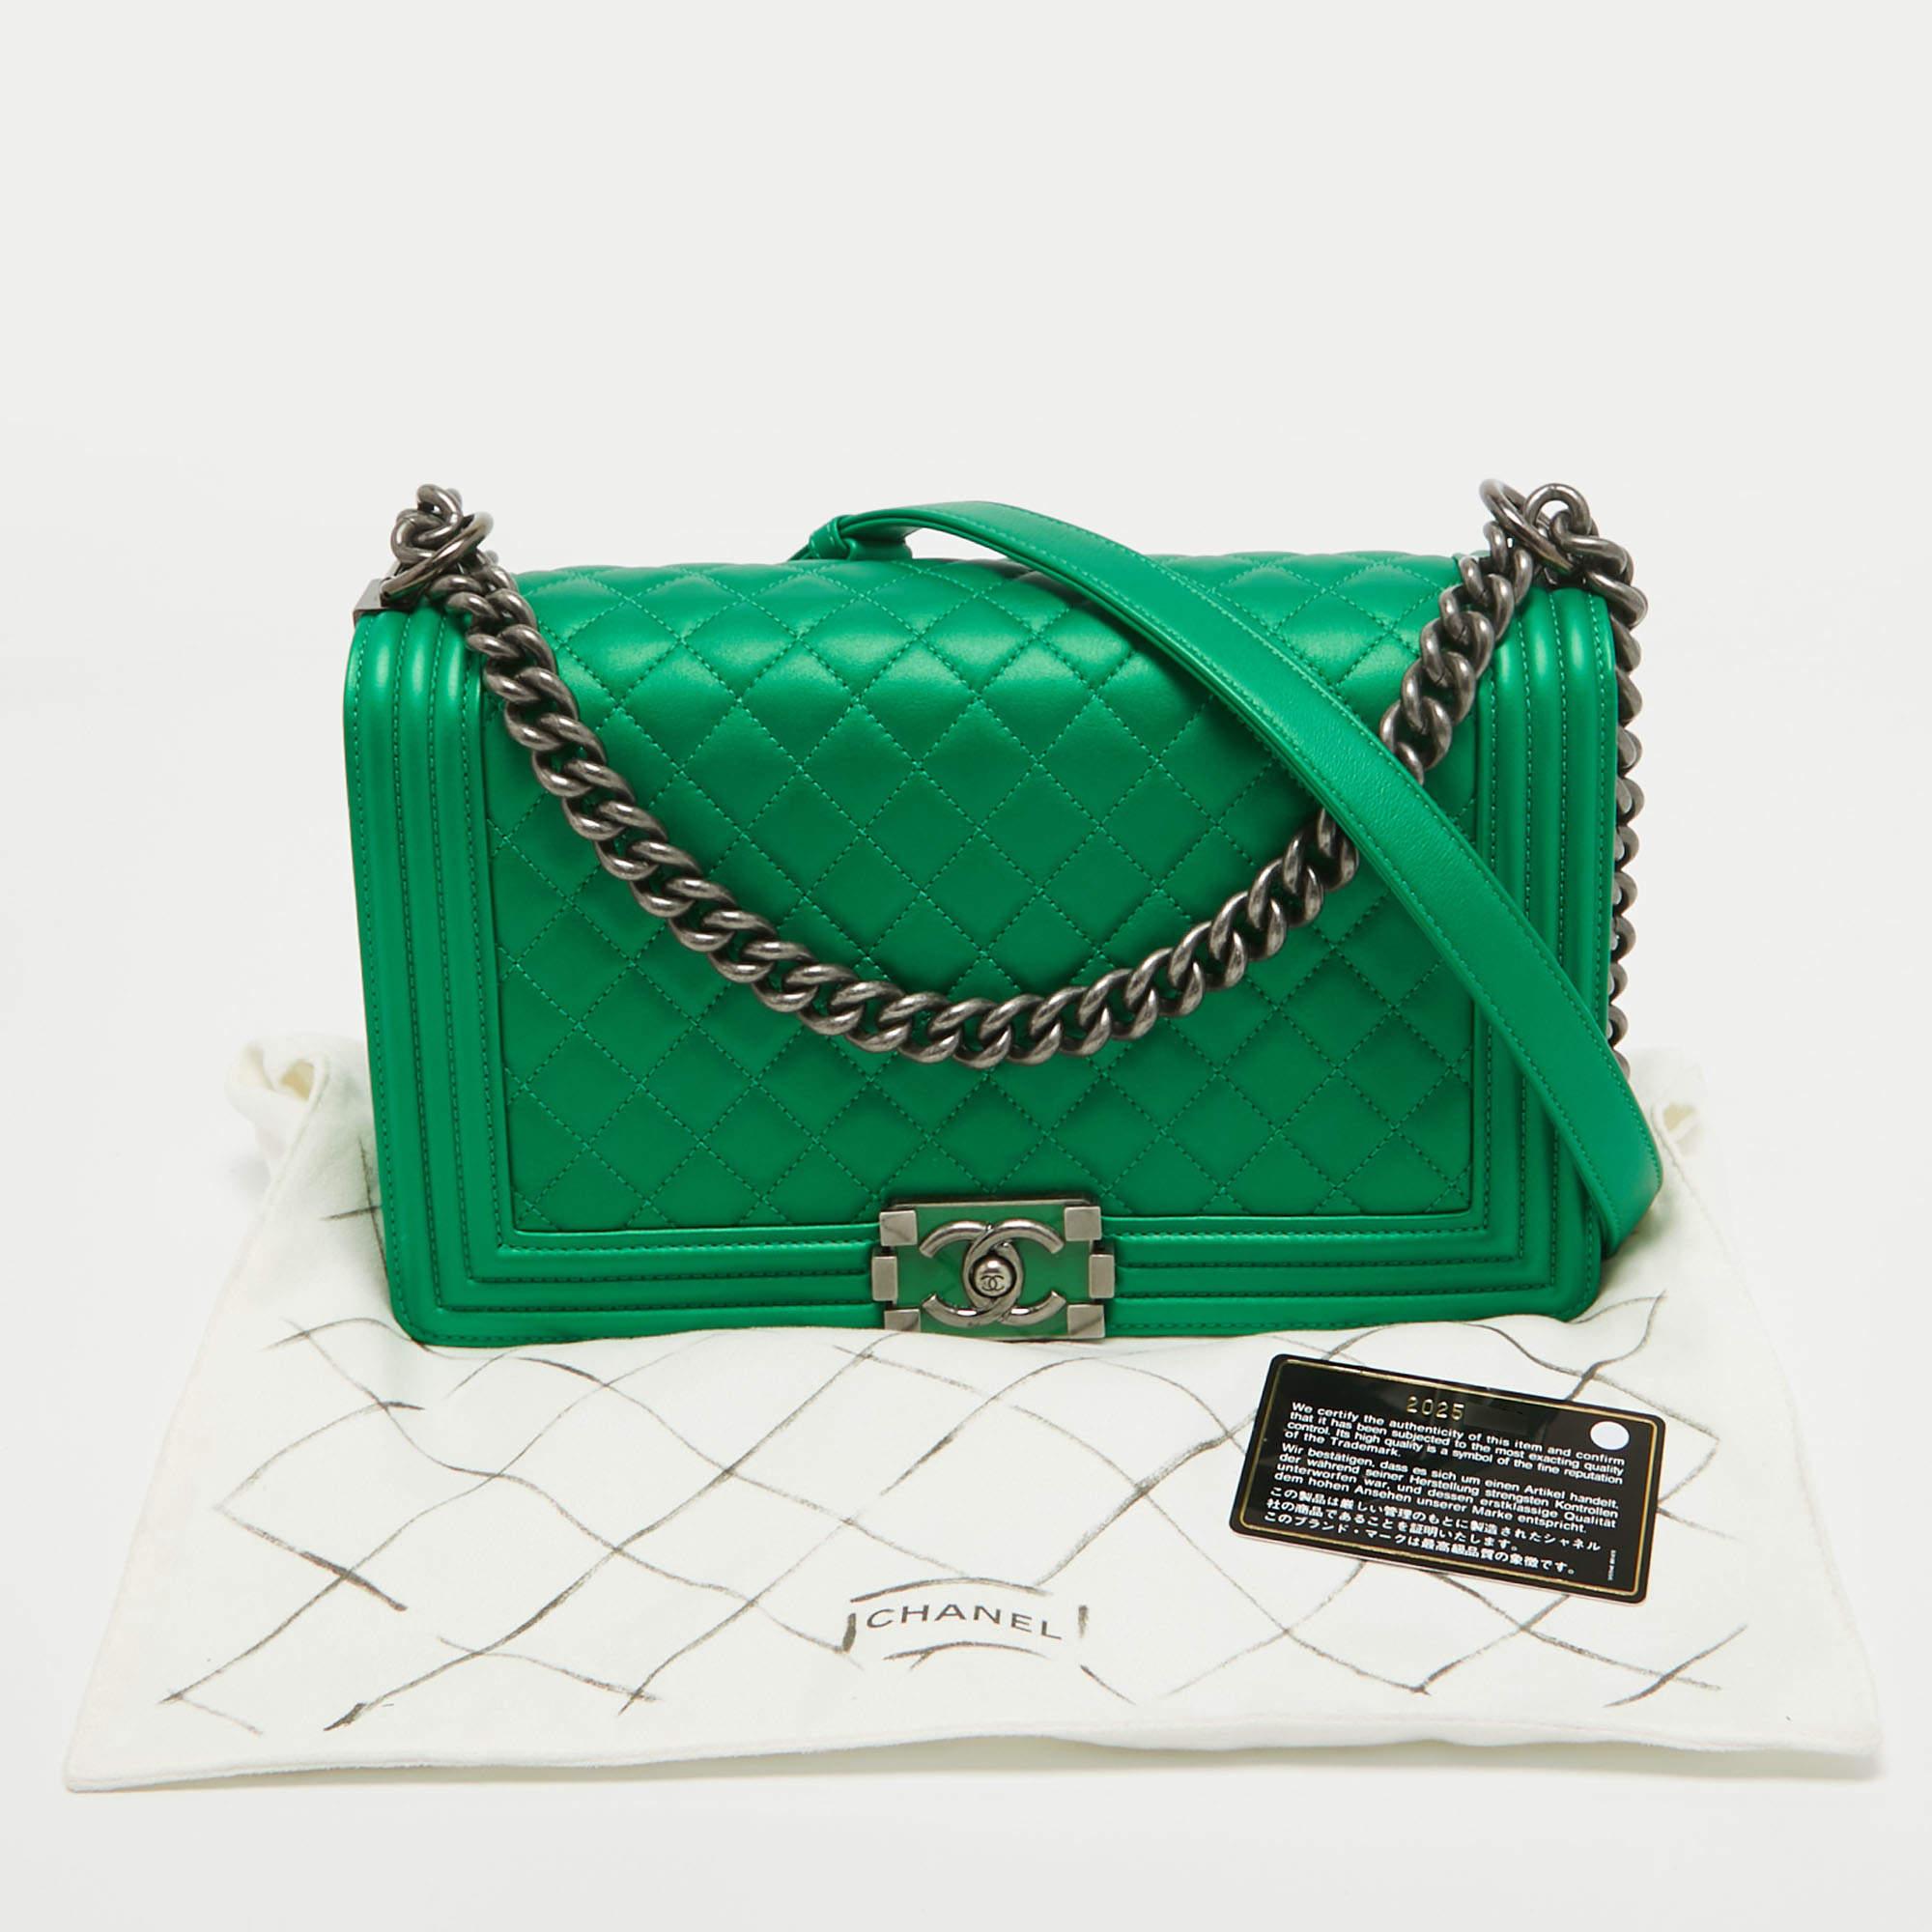 Chanel Metallic Green Quilted Leather New Medium Boy Bag 8